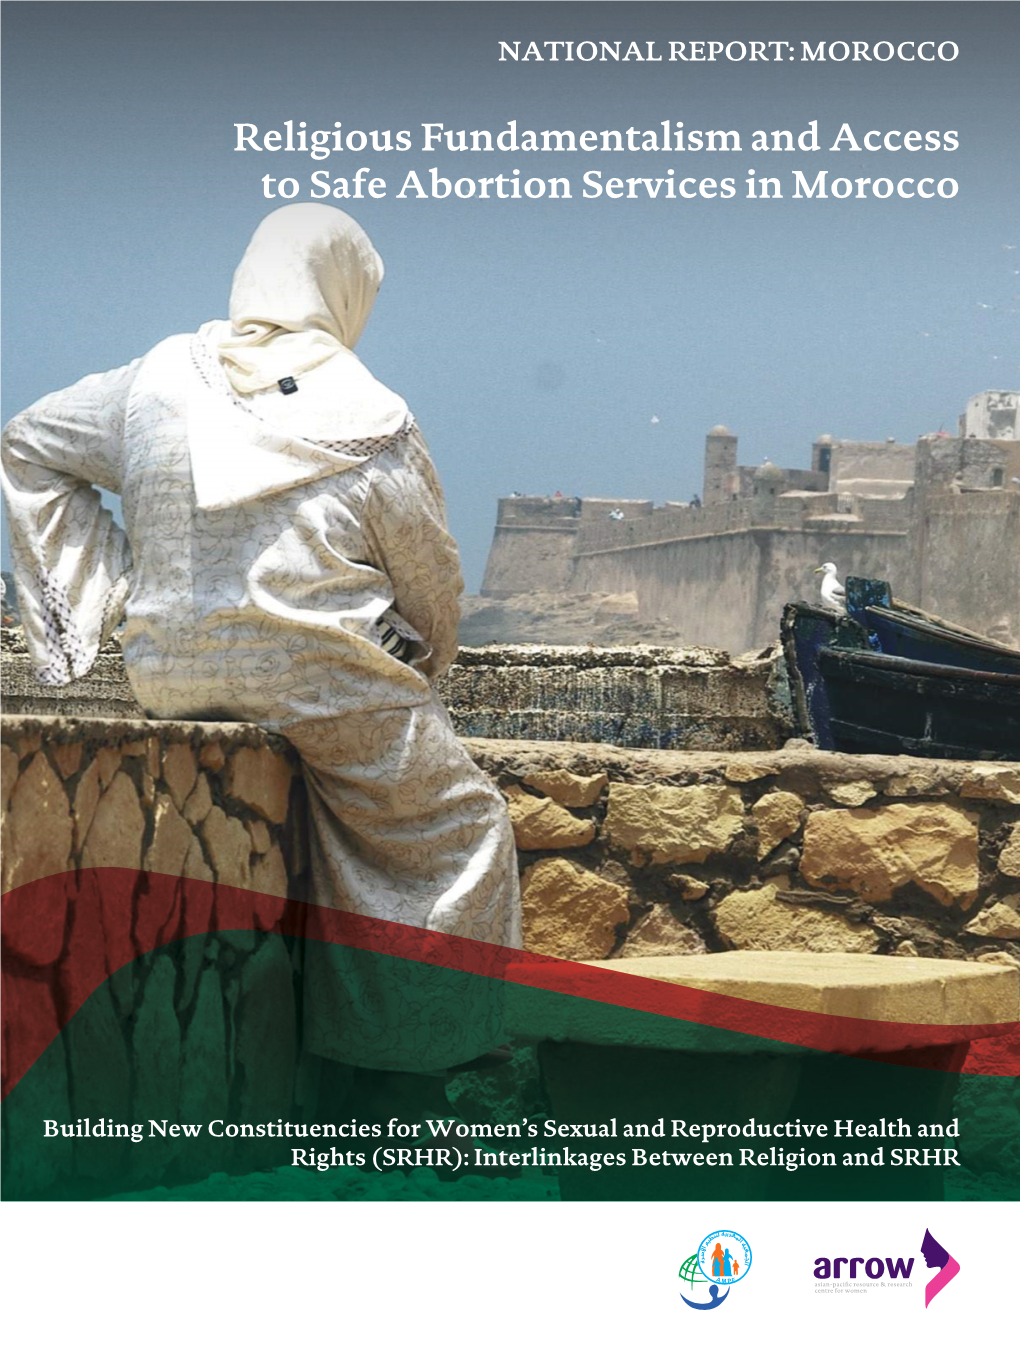 Religious Fundamentalism and Access to Safe Abortion Services in Morocco